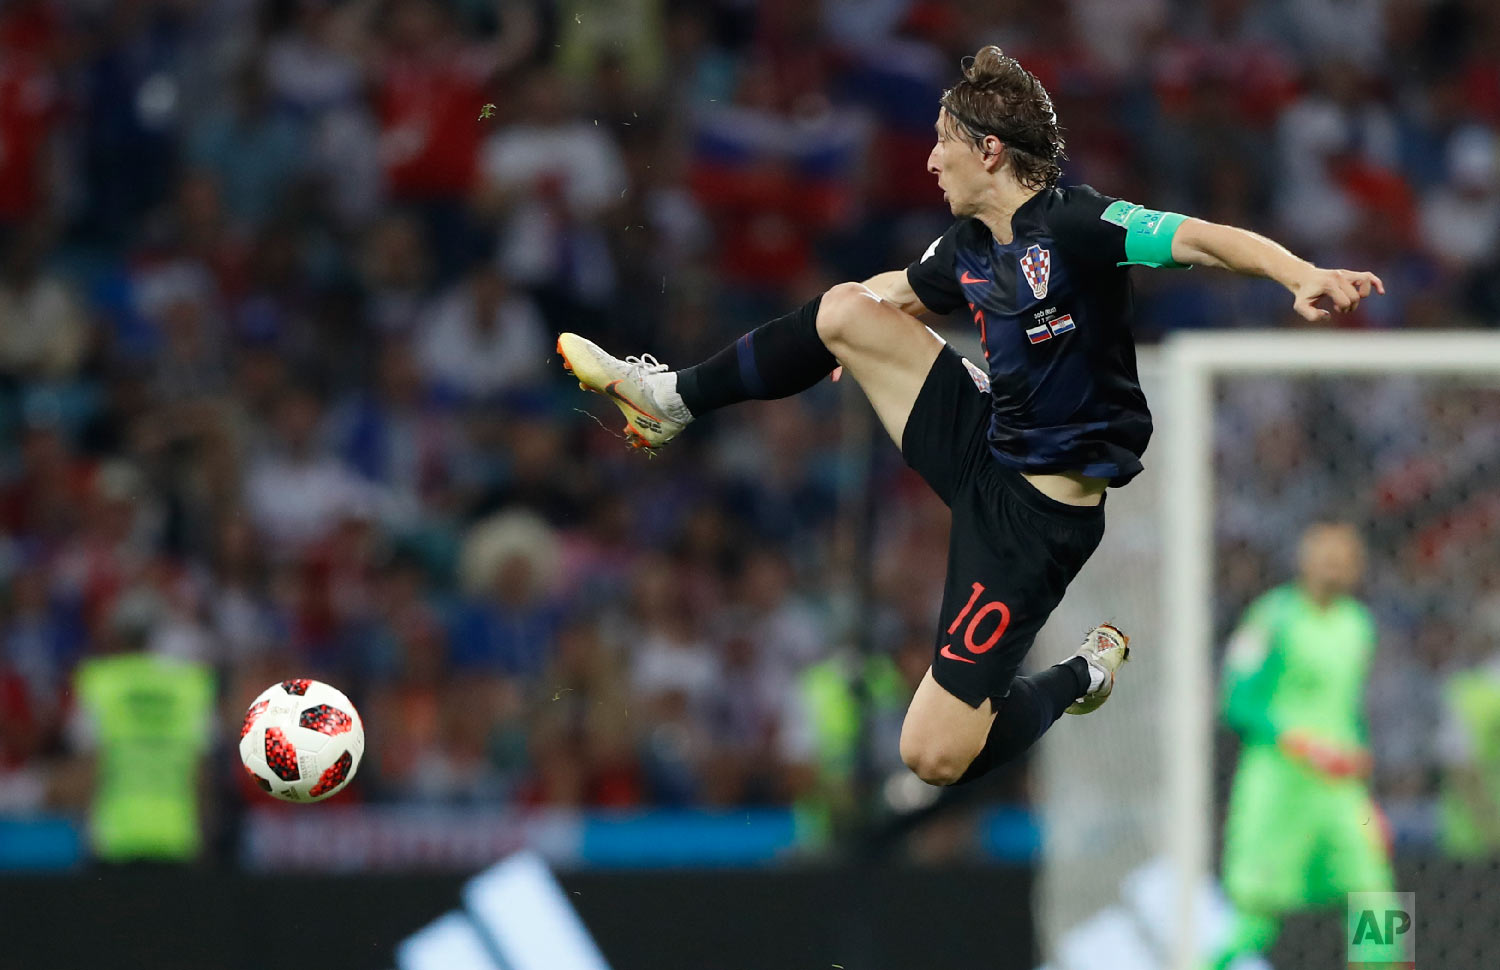  Croatia's Luka Modric jumps for the ball during the quarterfinal match between Russia and Croatia at the 2018 soccer World Cup in the Fisht Stadium, in Sochi, Russia, Saturday, July 7, 2018. (AP Photo/Darko Bandic) 